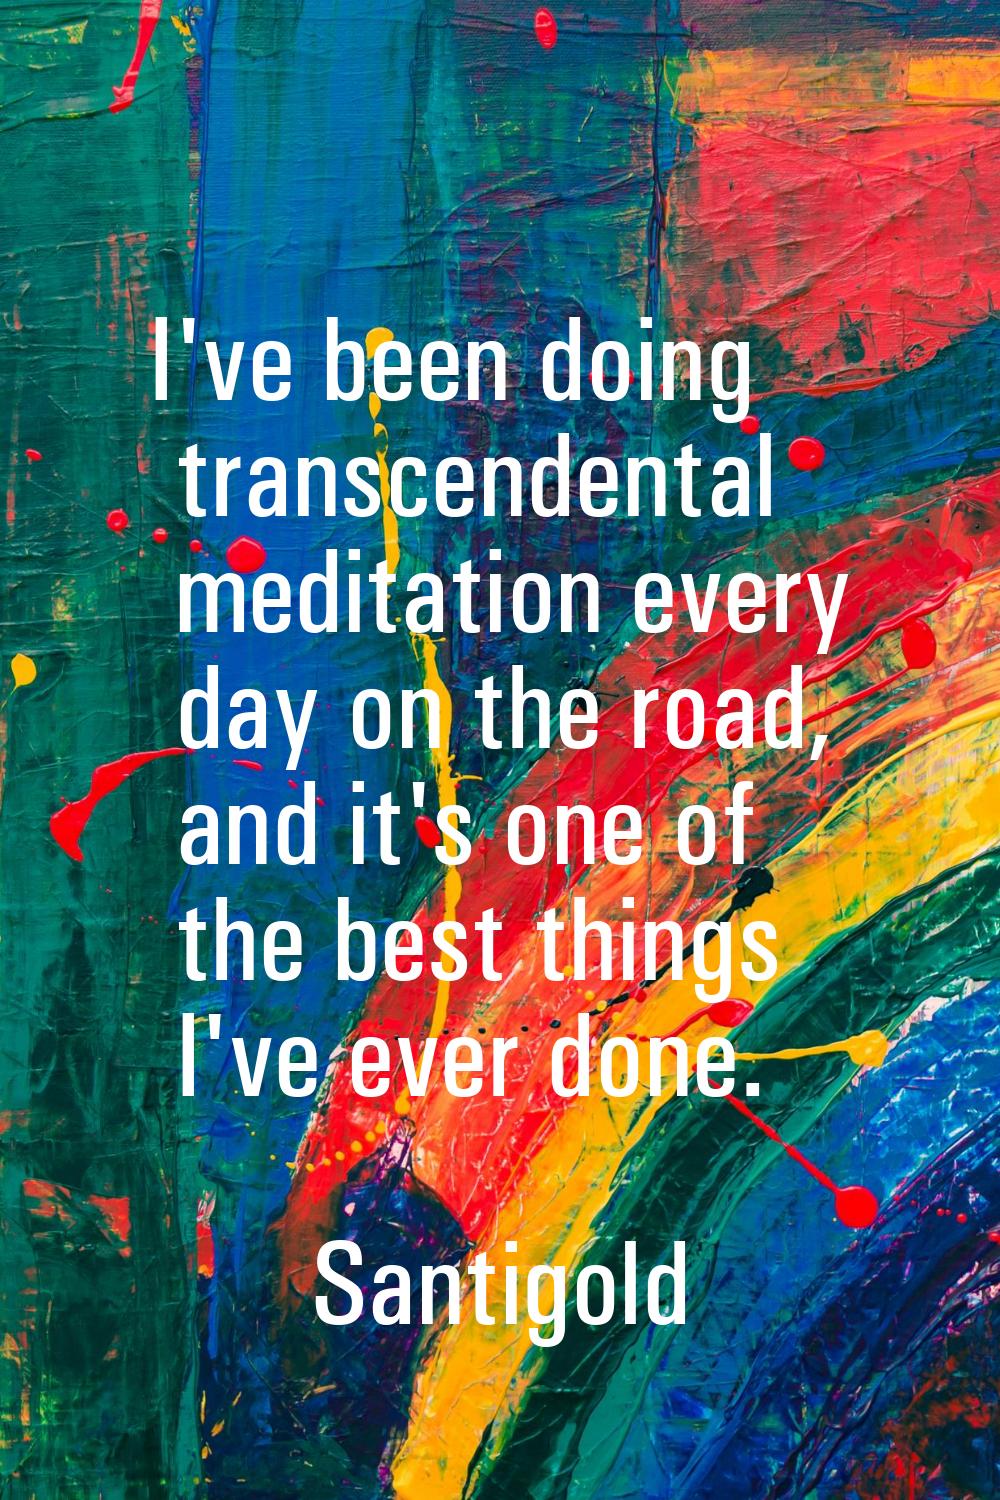 I've been doing transcendental meditation every day on the road, and it's one of the best things I'